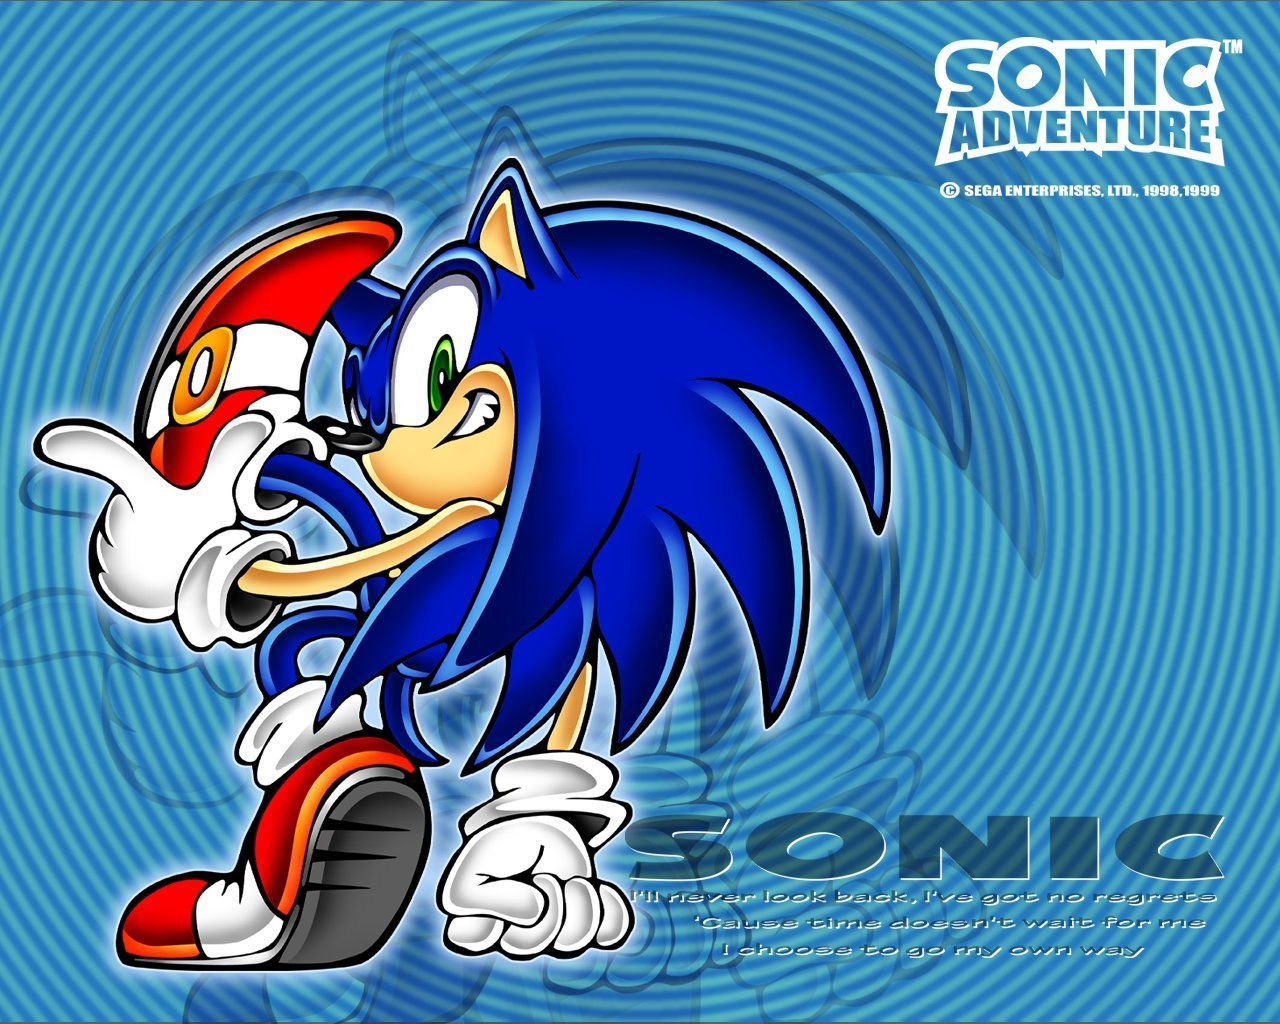 Sonic Adventure Facts Wallpaper From Sonic Adventure International's GD Rom